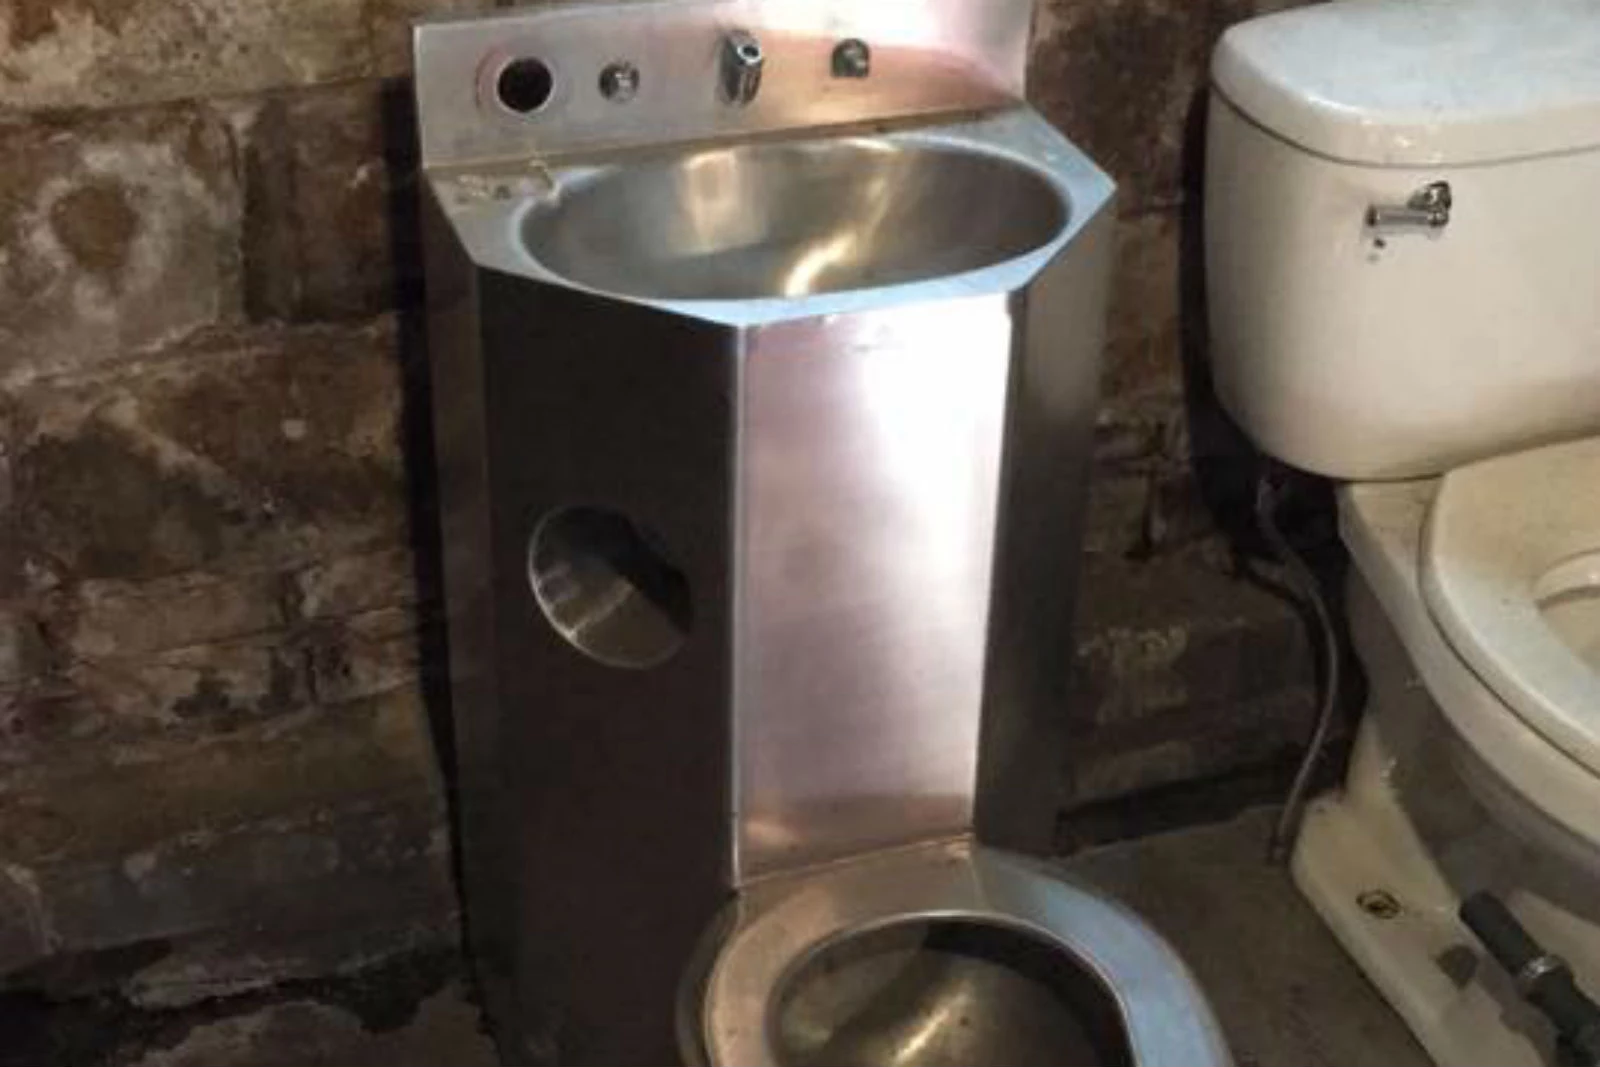 There's A Prison Toilet For Sale On Facebook In Maine